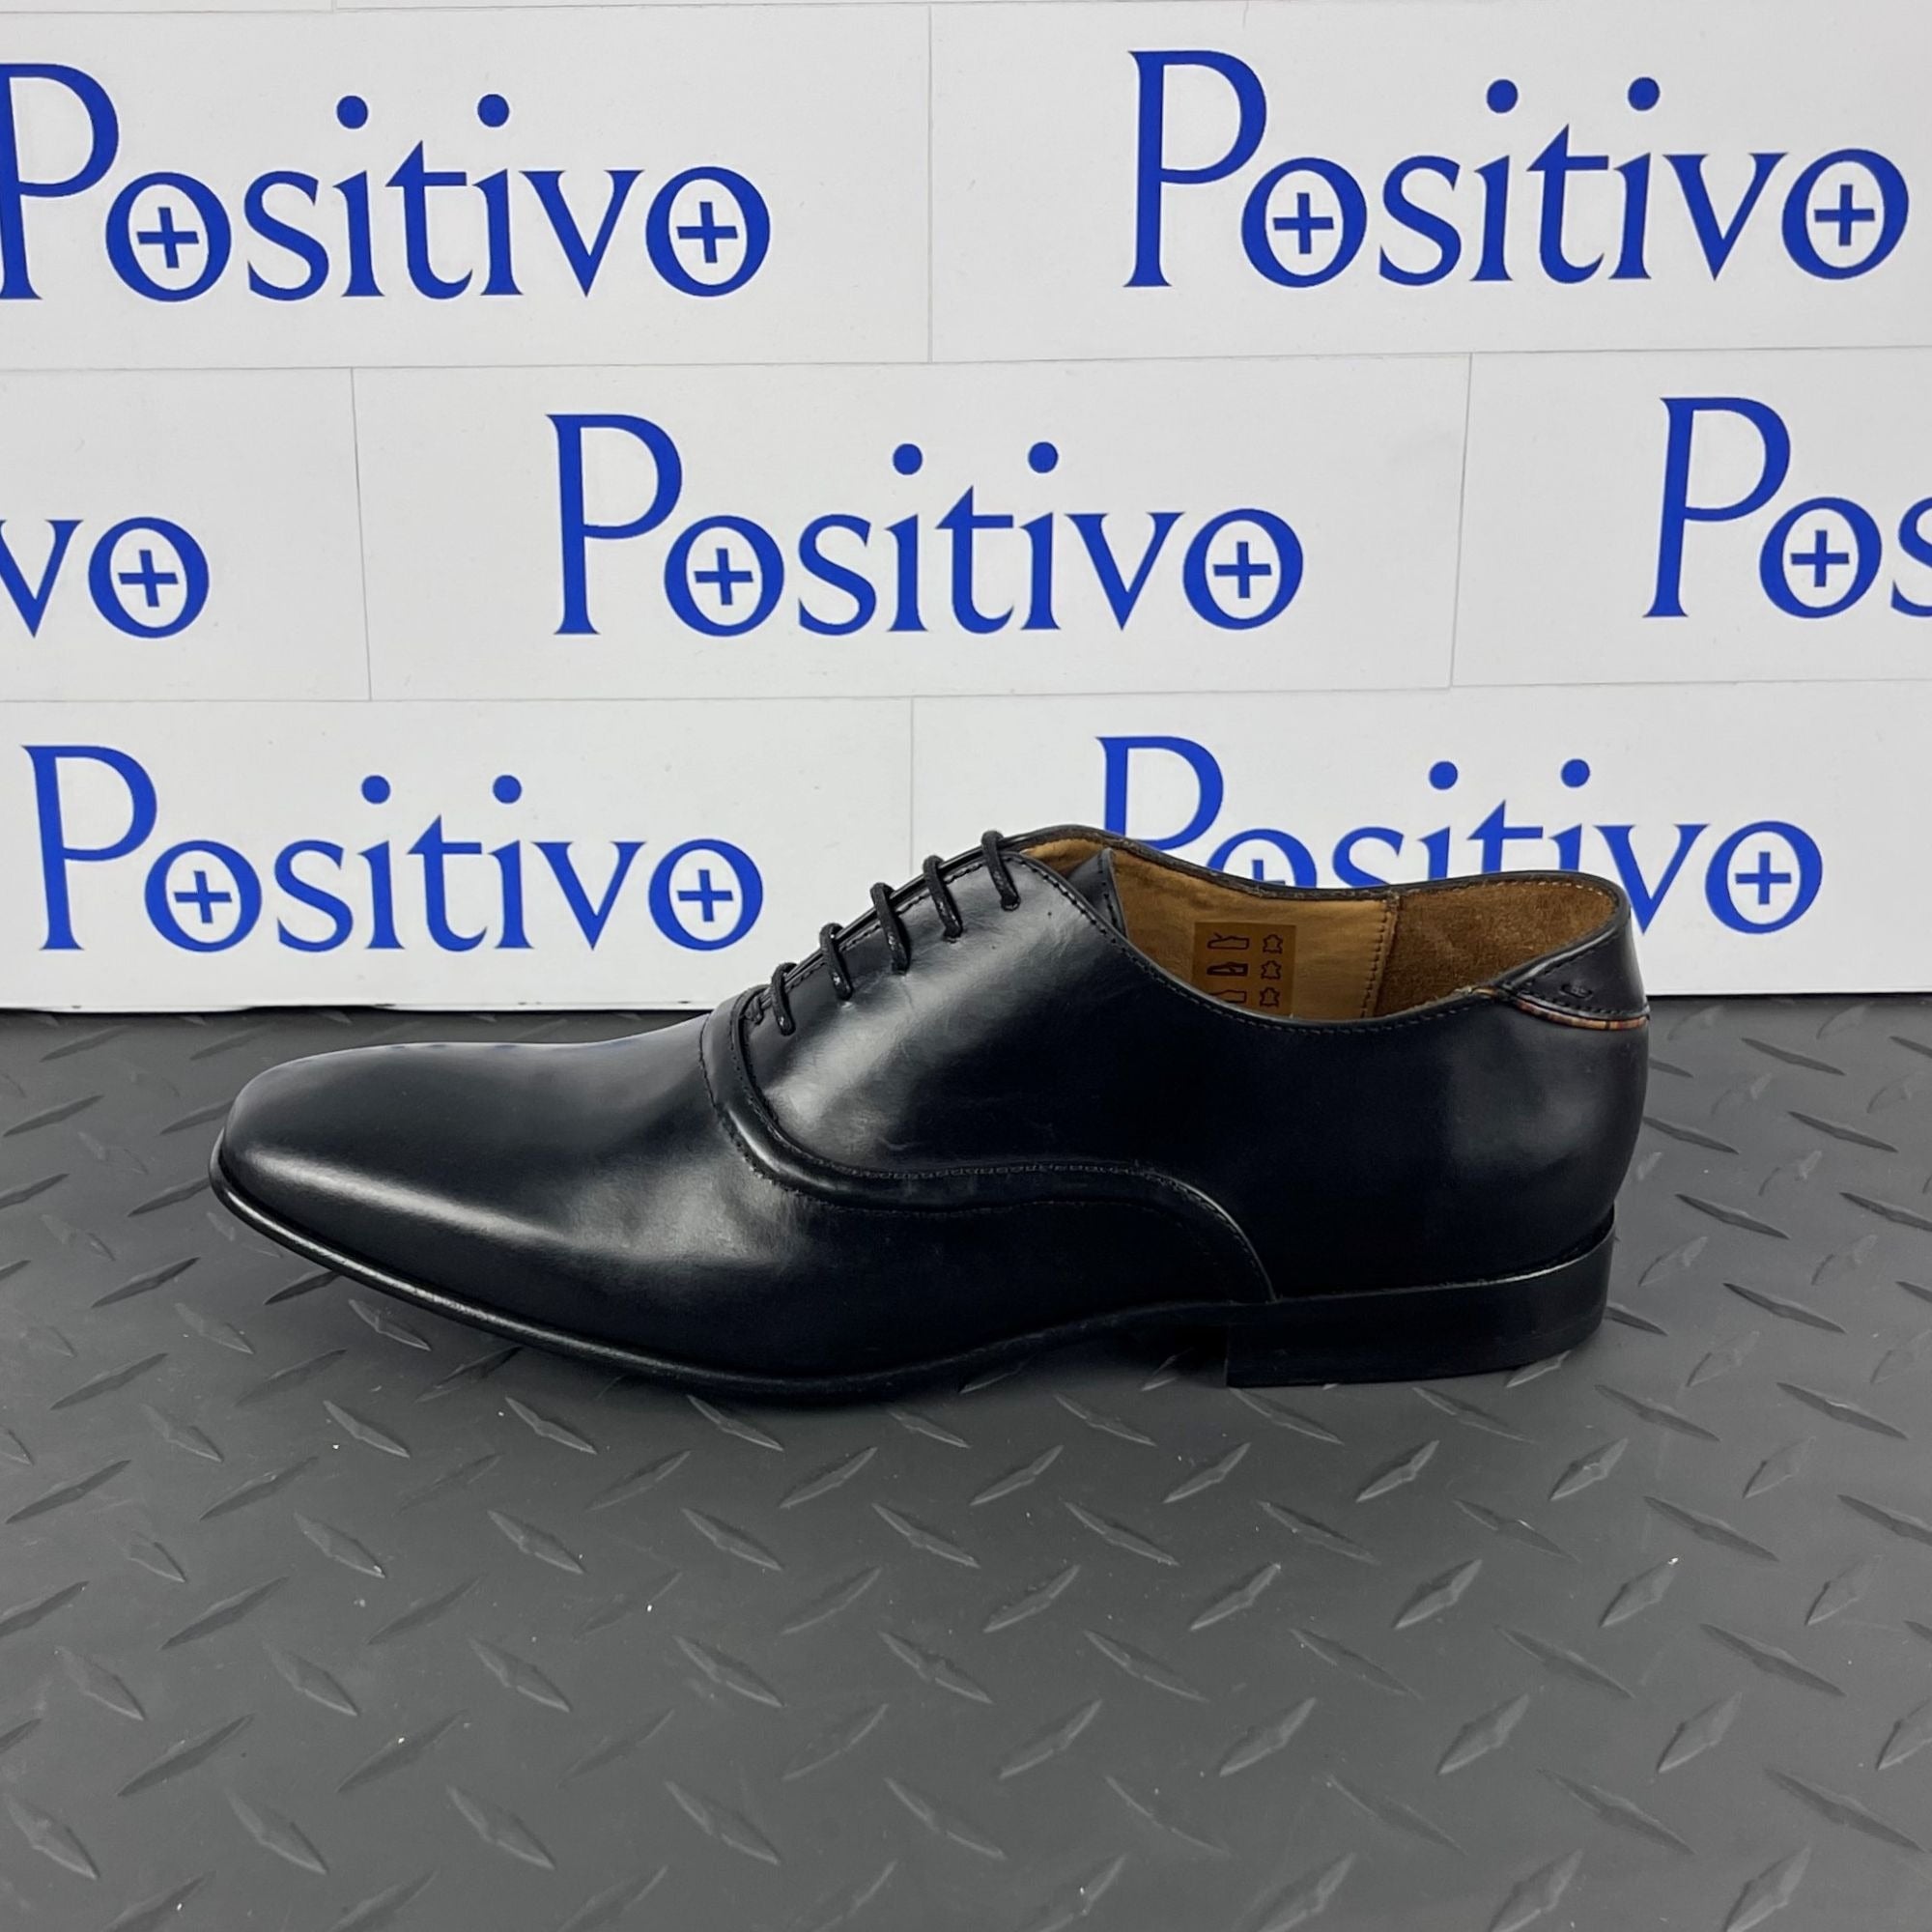 Paul Smith Starling Black Leather Oxfords | Positivo Clothing